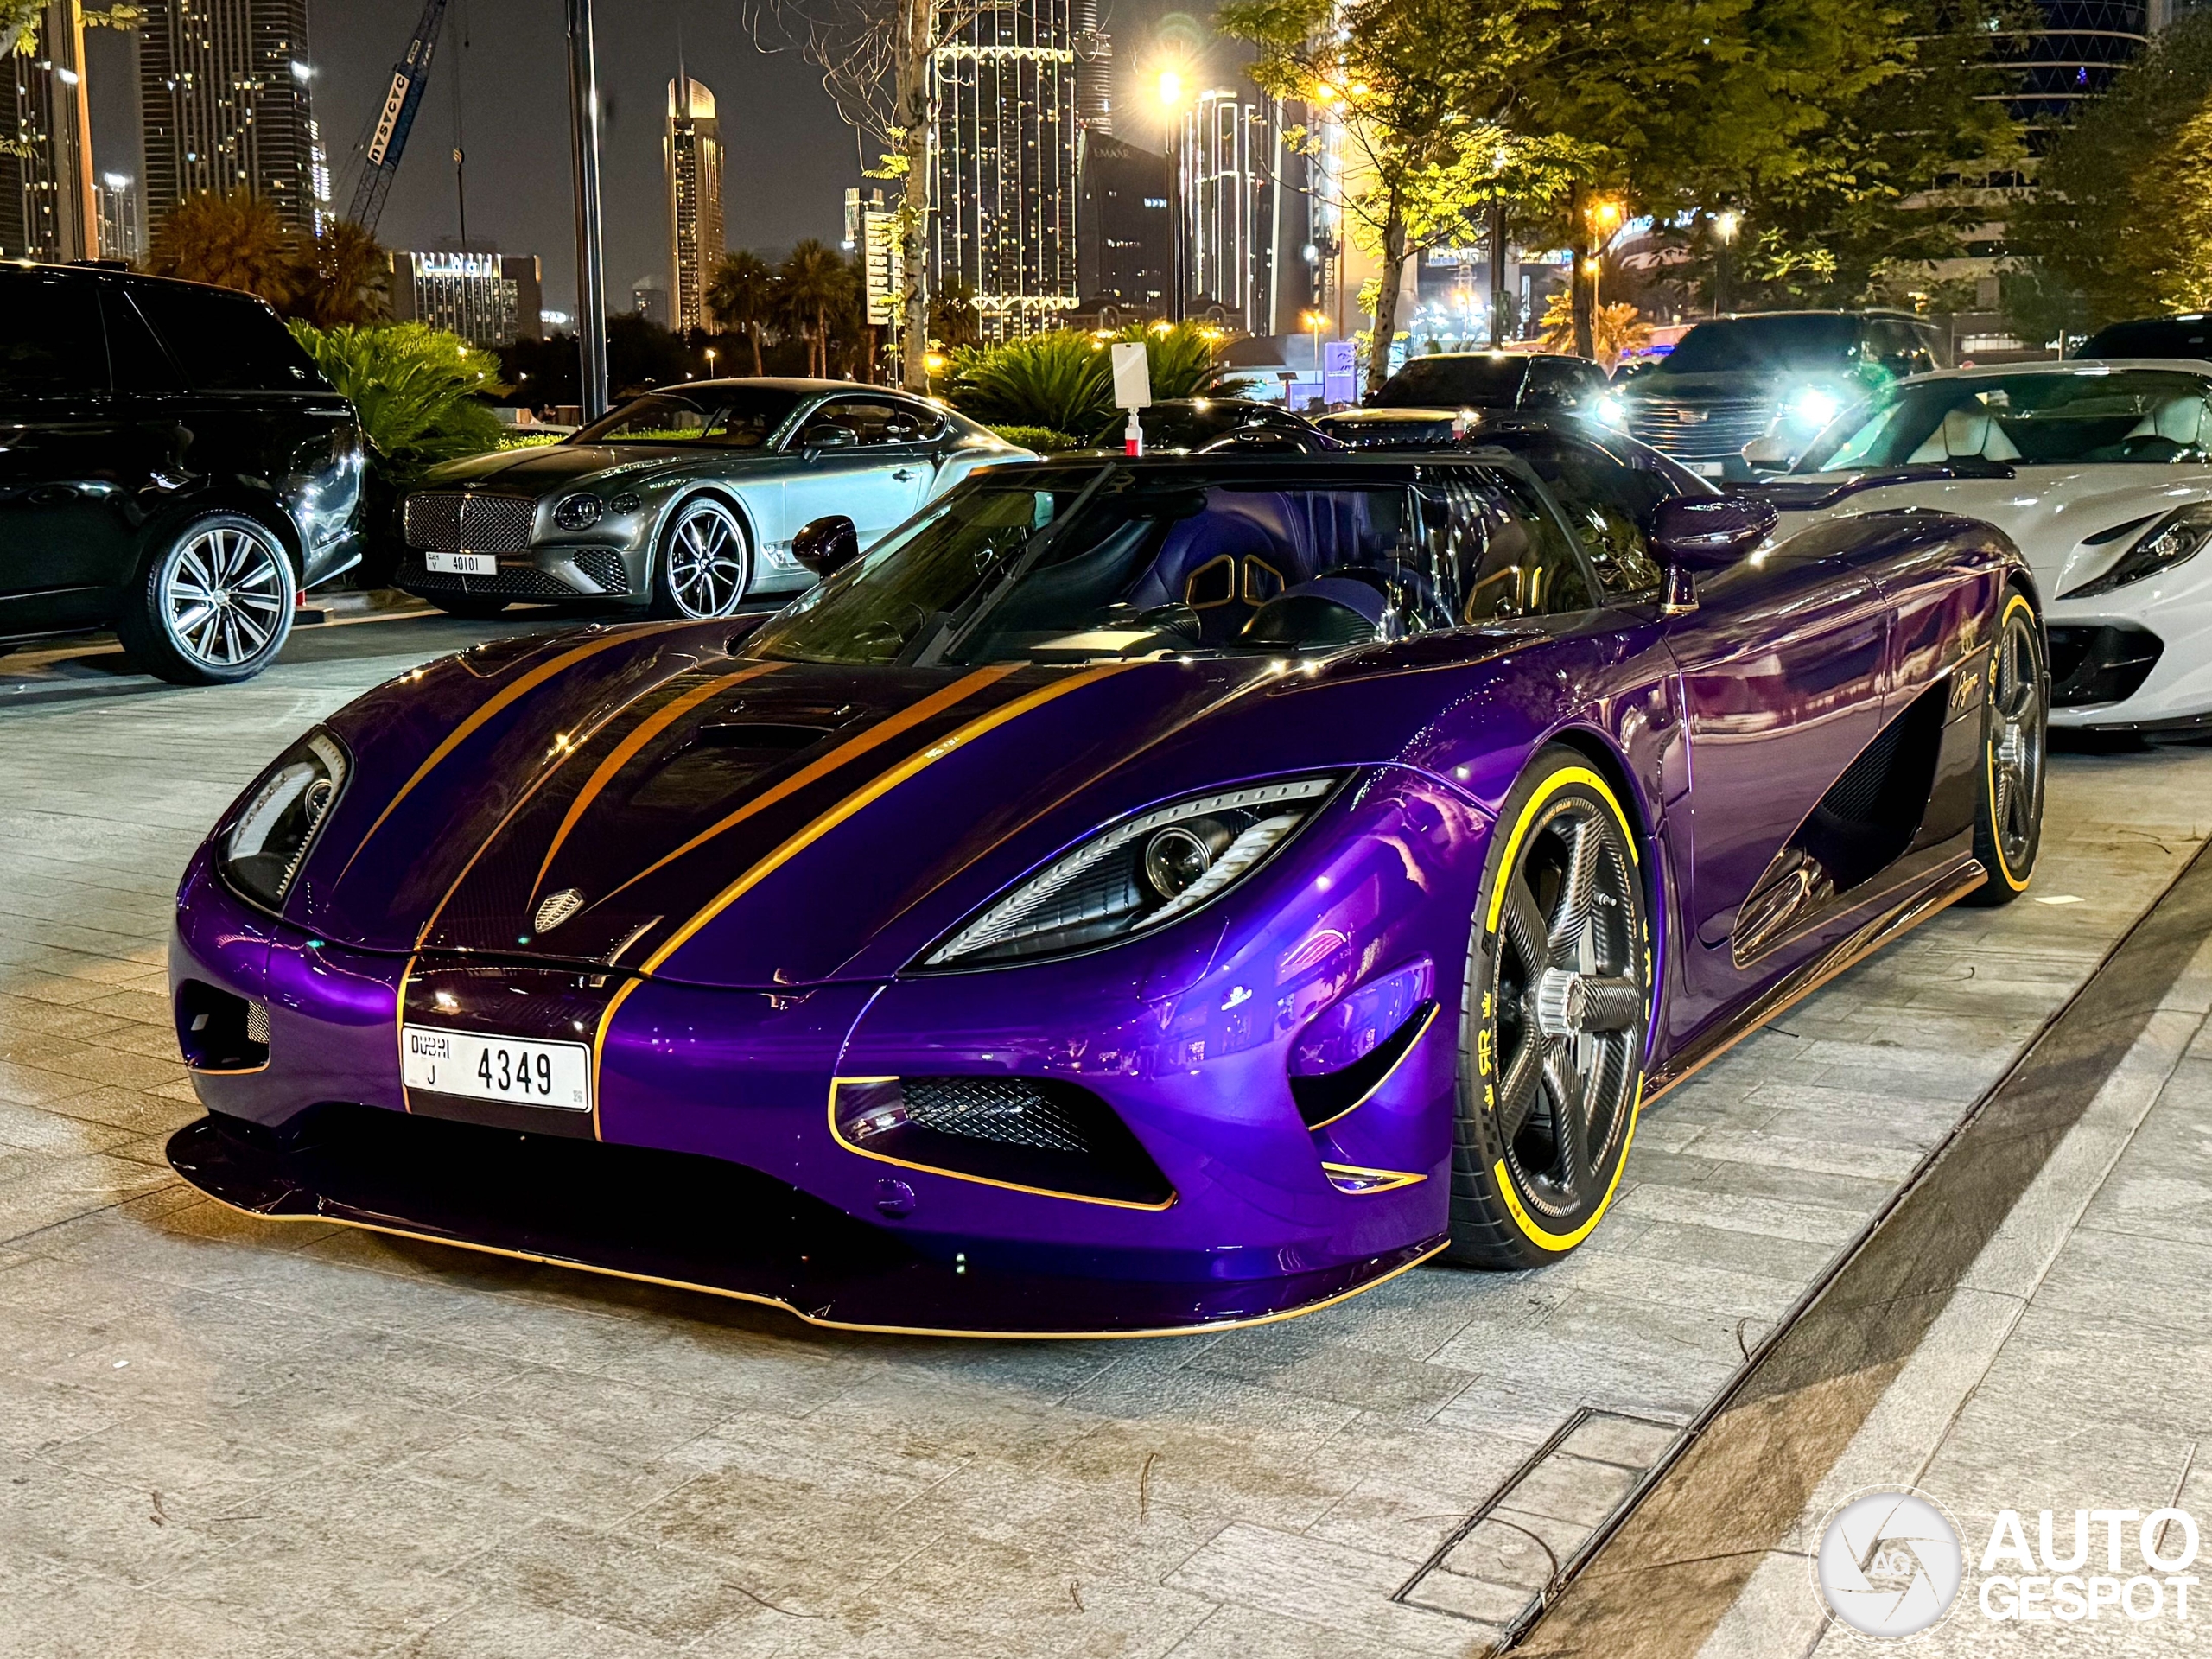 The Agera R Zijin has an extensive history